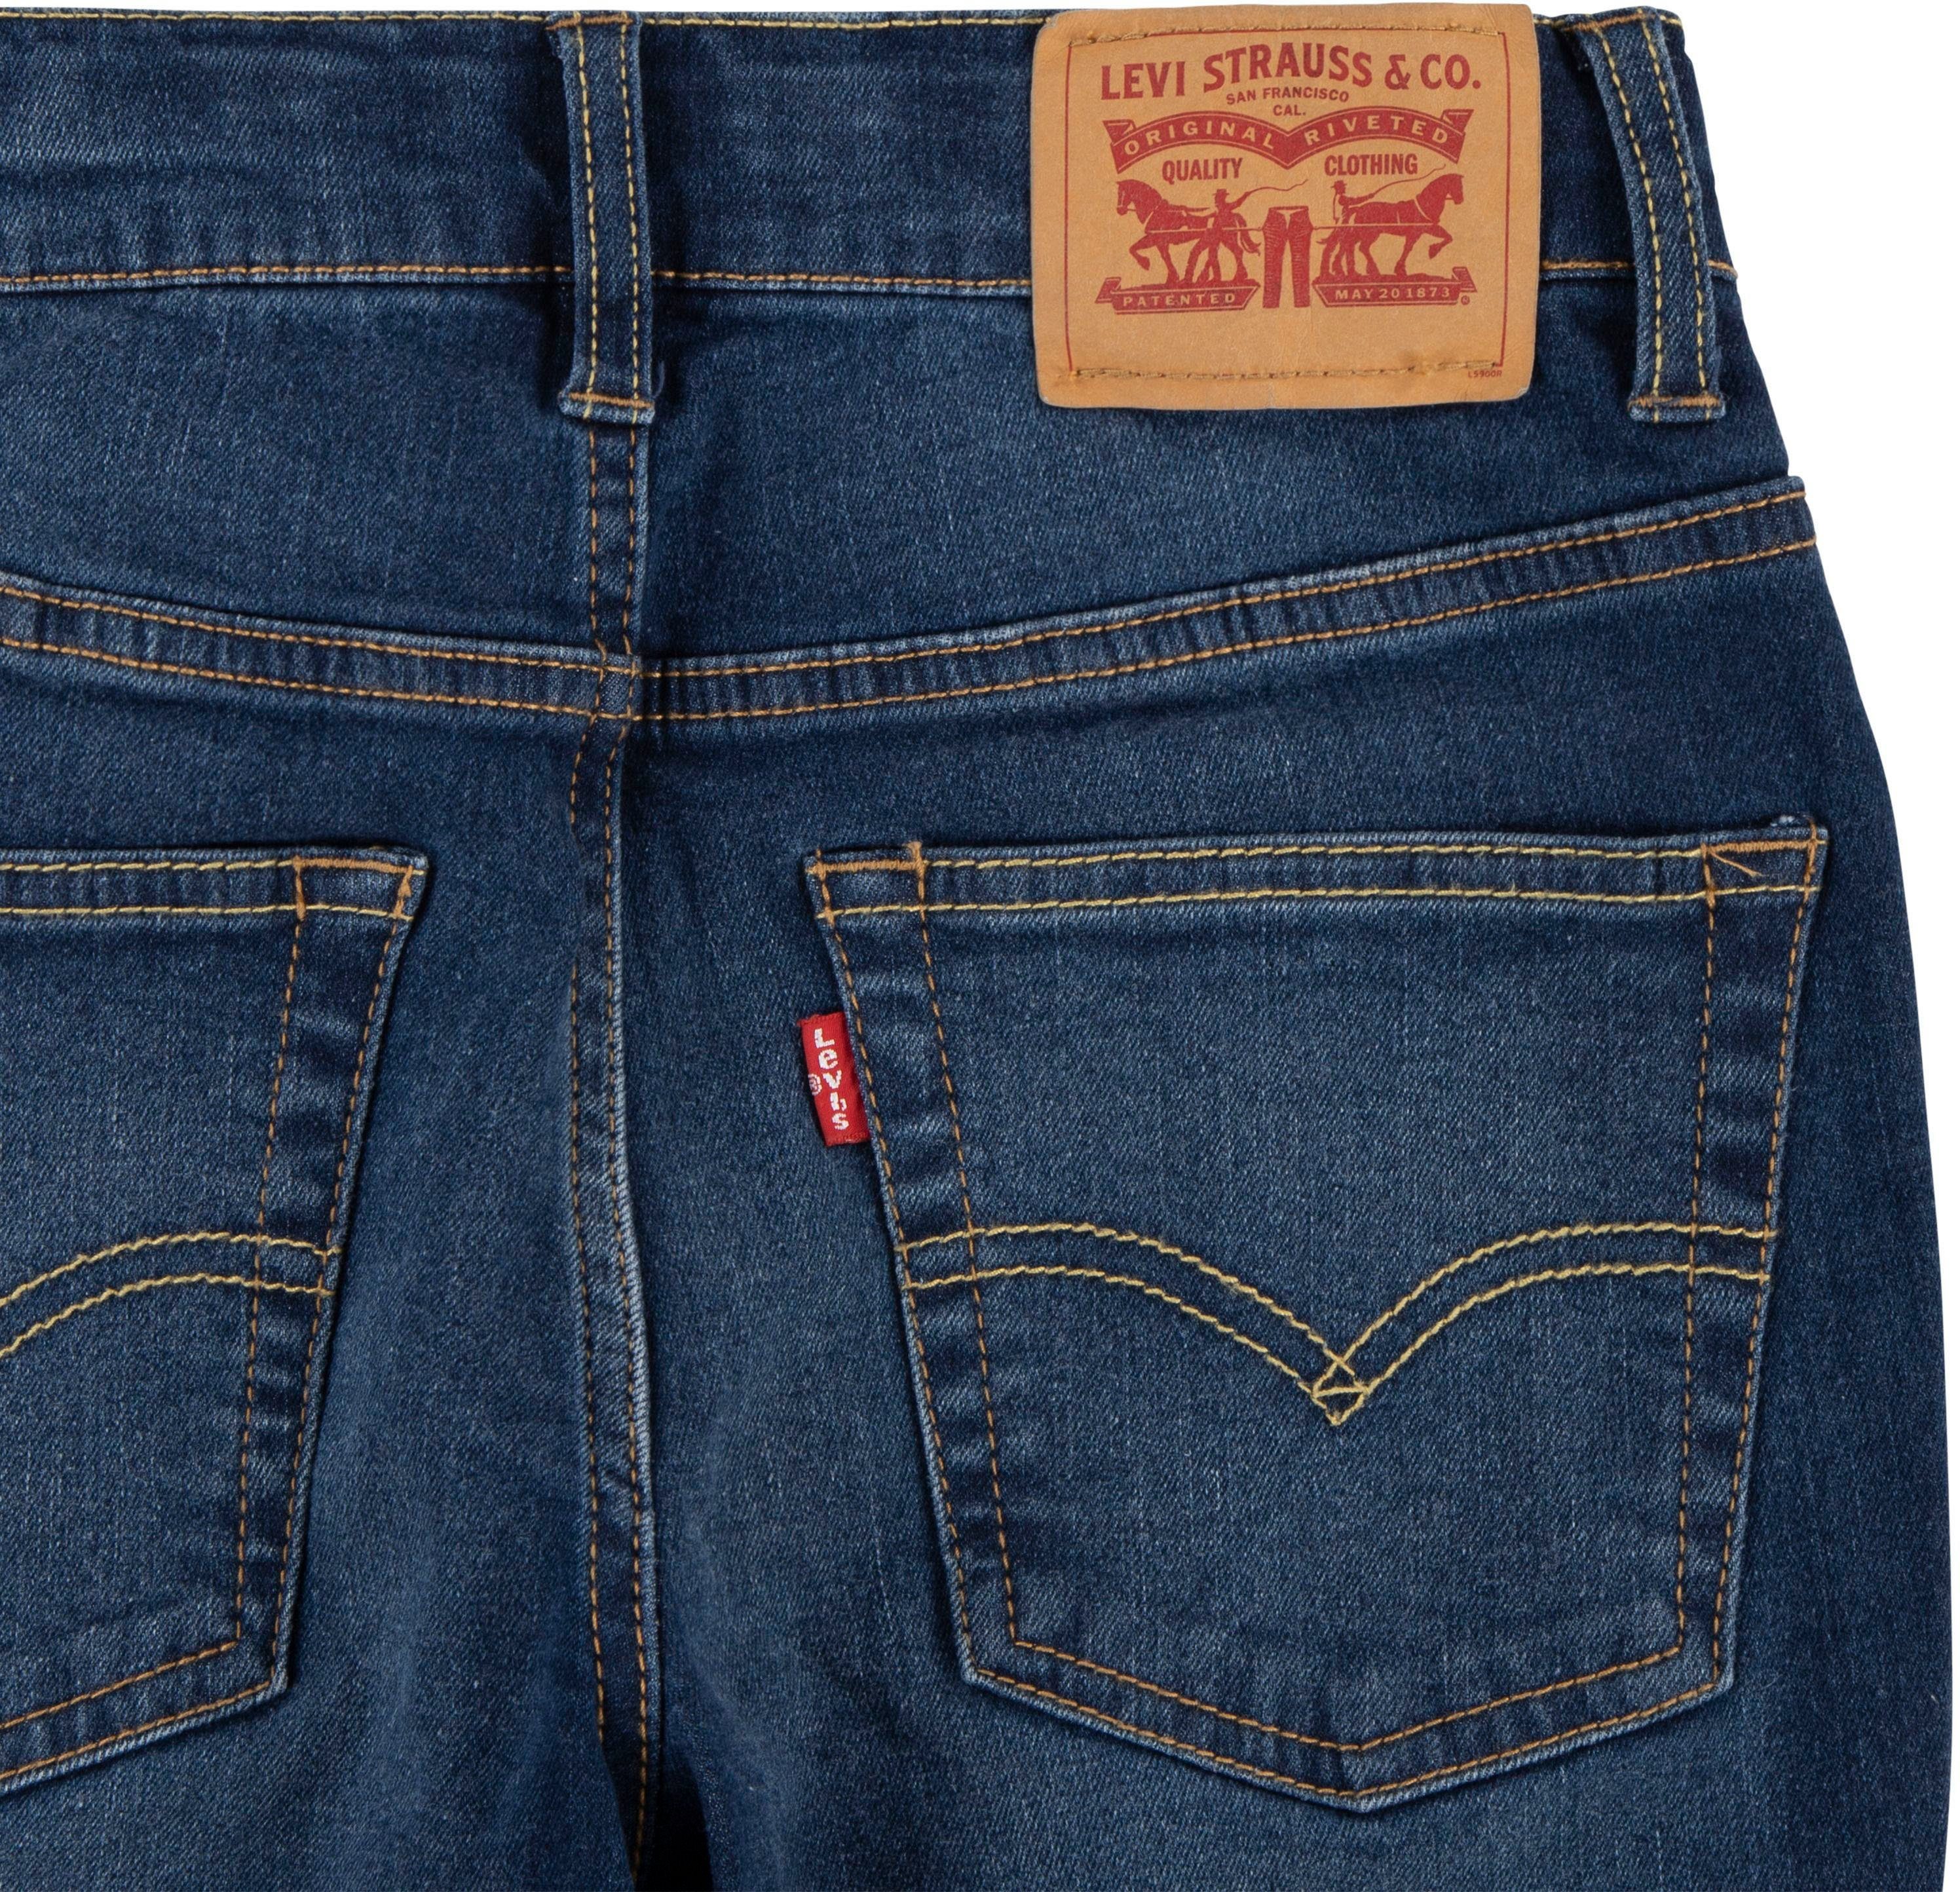 Stretch-Jeans BOYS 512 STRONG garland PERFORMANCE Levi's® for Kids